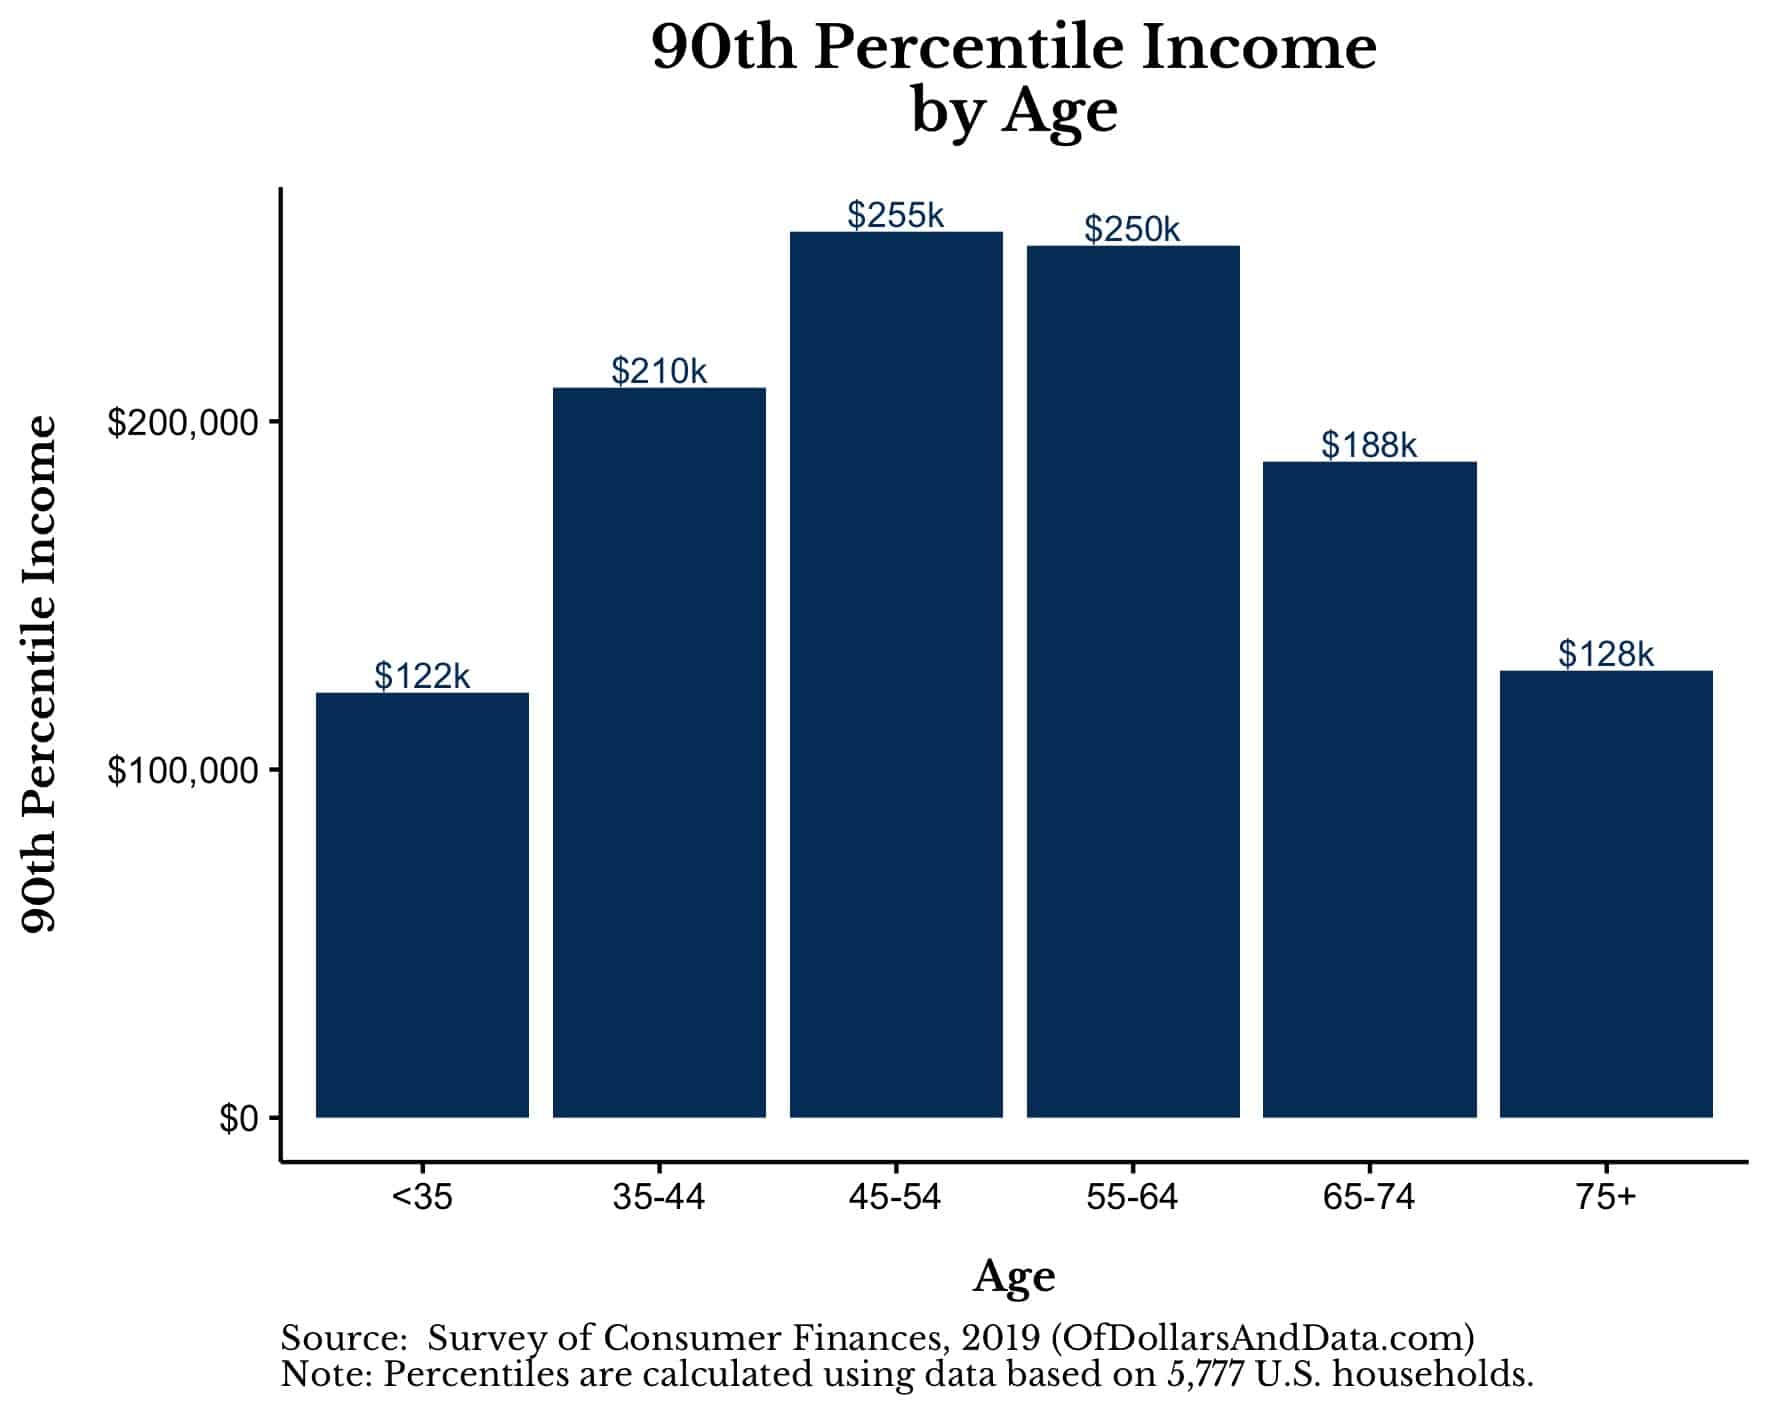 90th percentile household income by age.